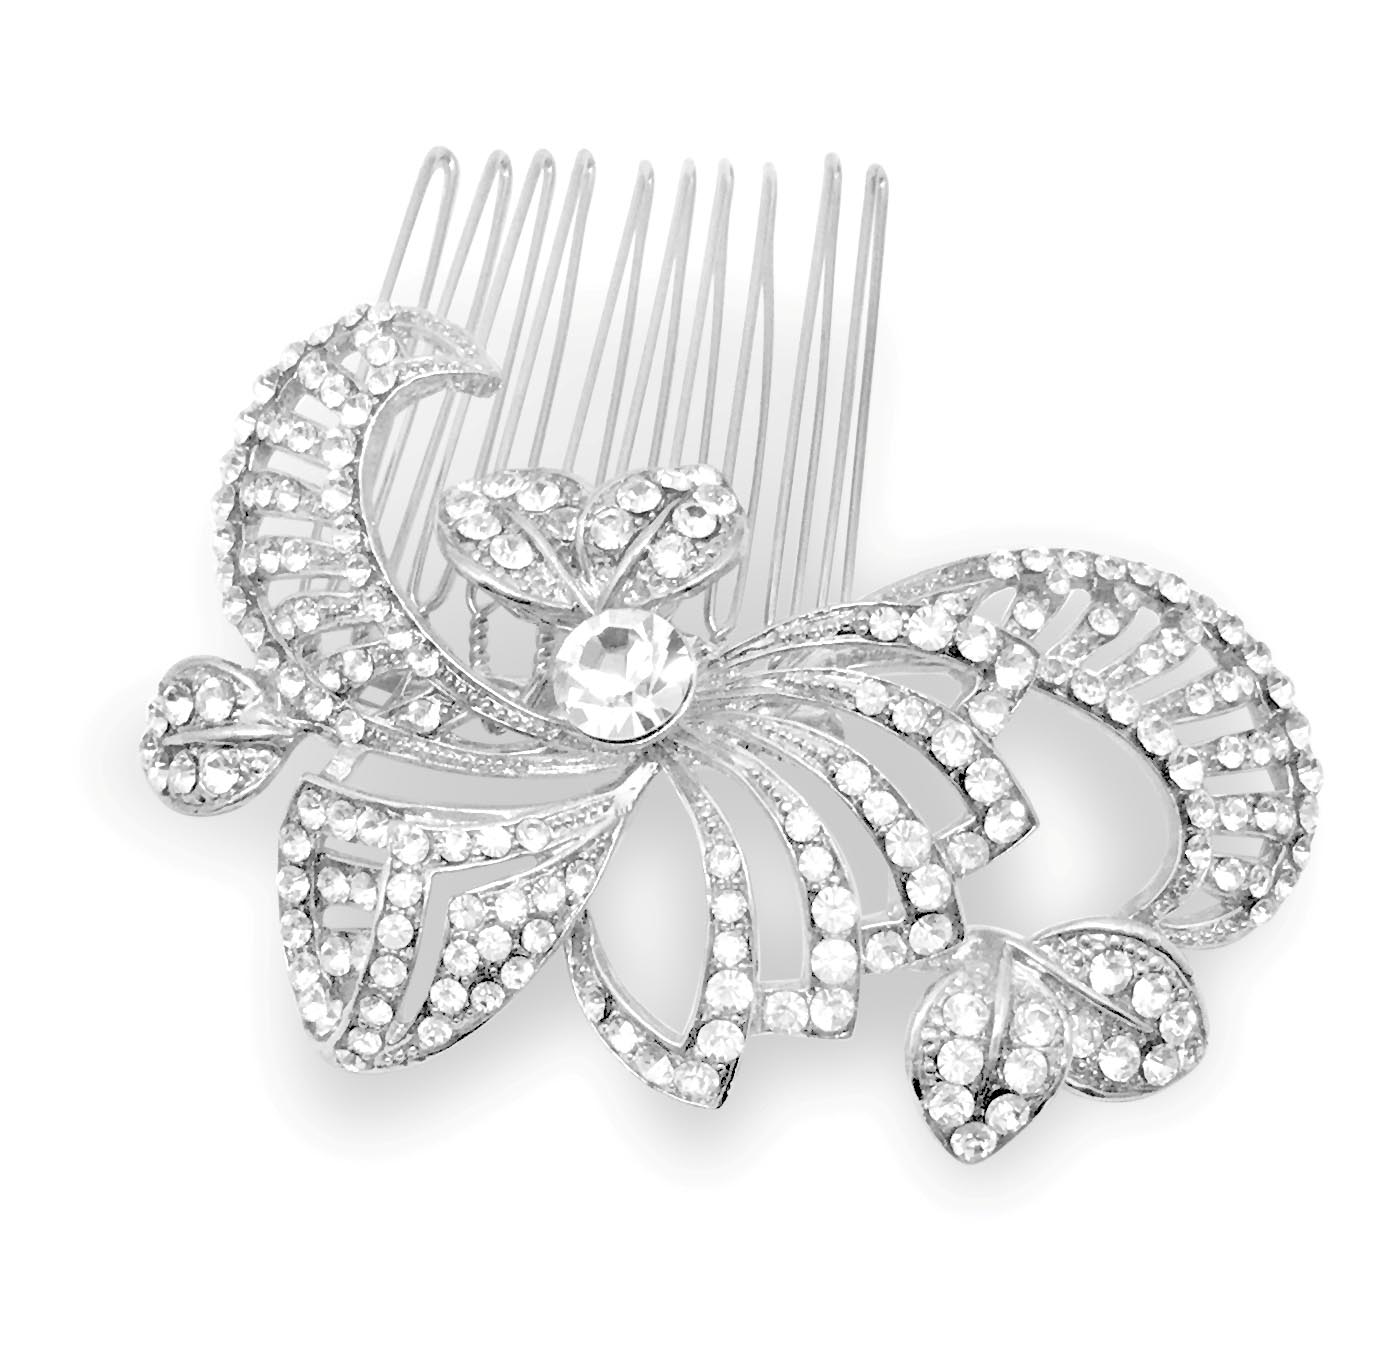 Hair Comb Clips|Jada|Jeanette Maree|Shop Online Now